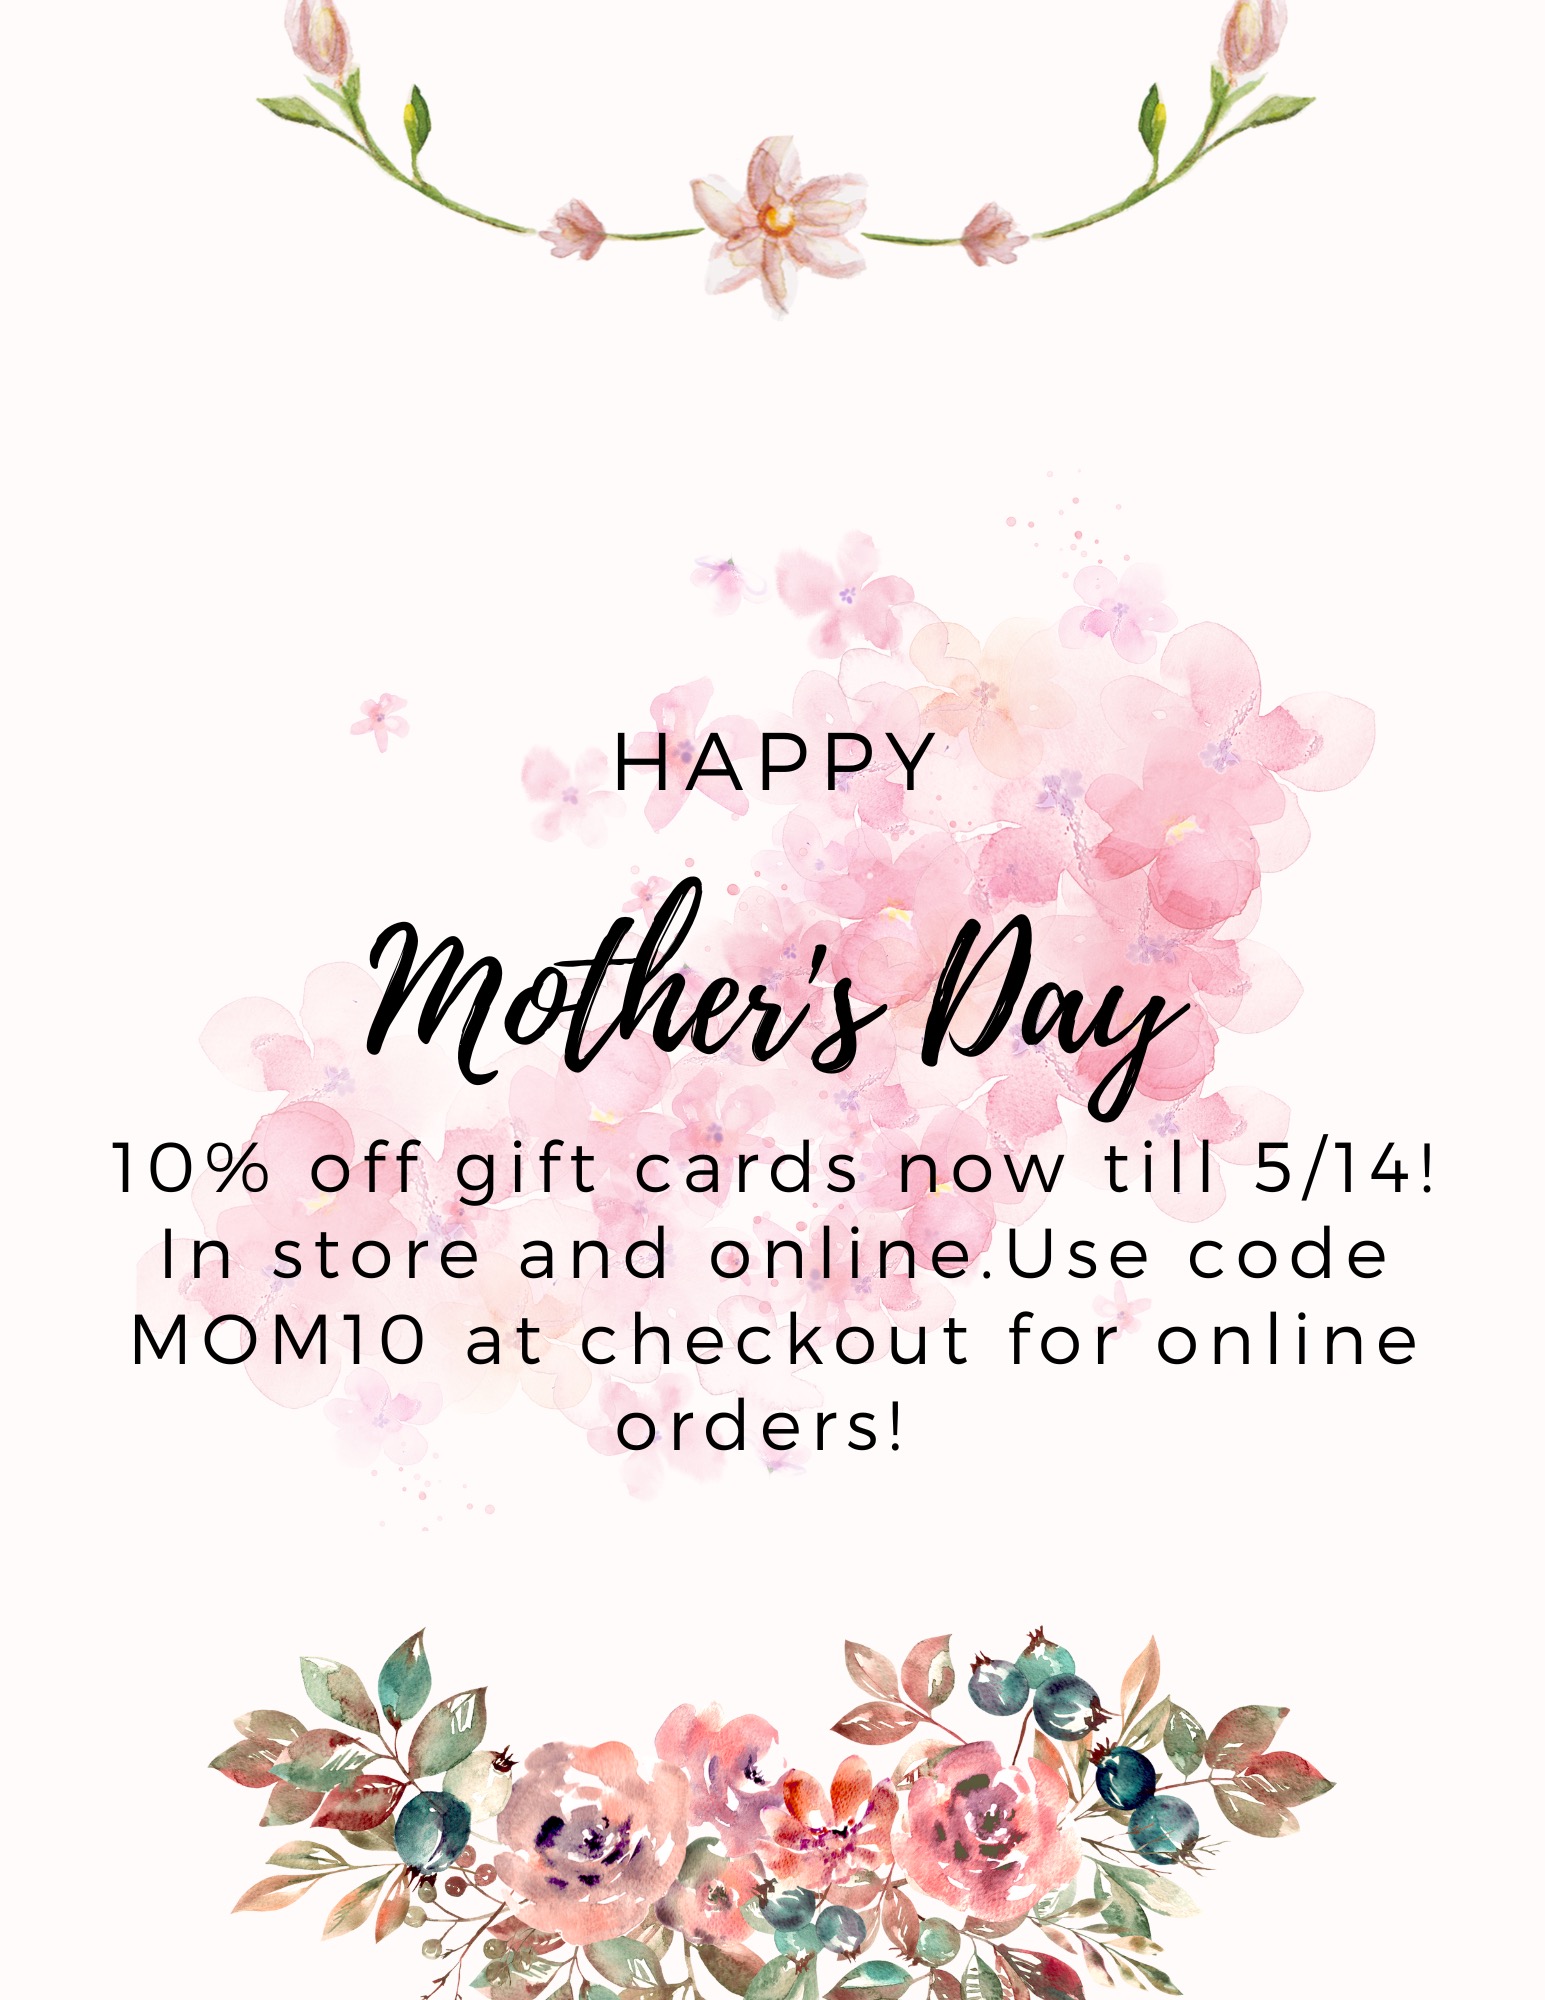 Don't forget Mom, the perfect gift for Mother's Day!